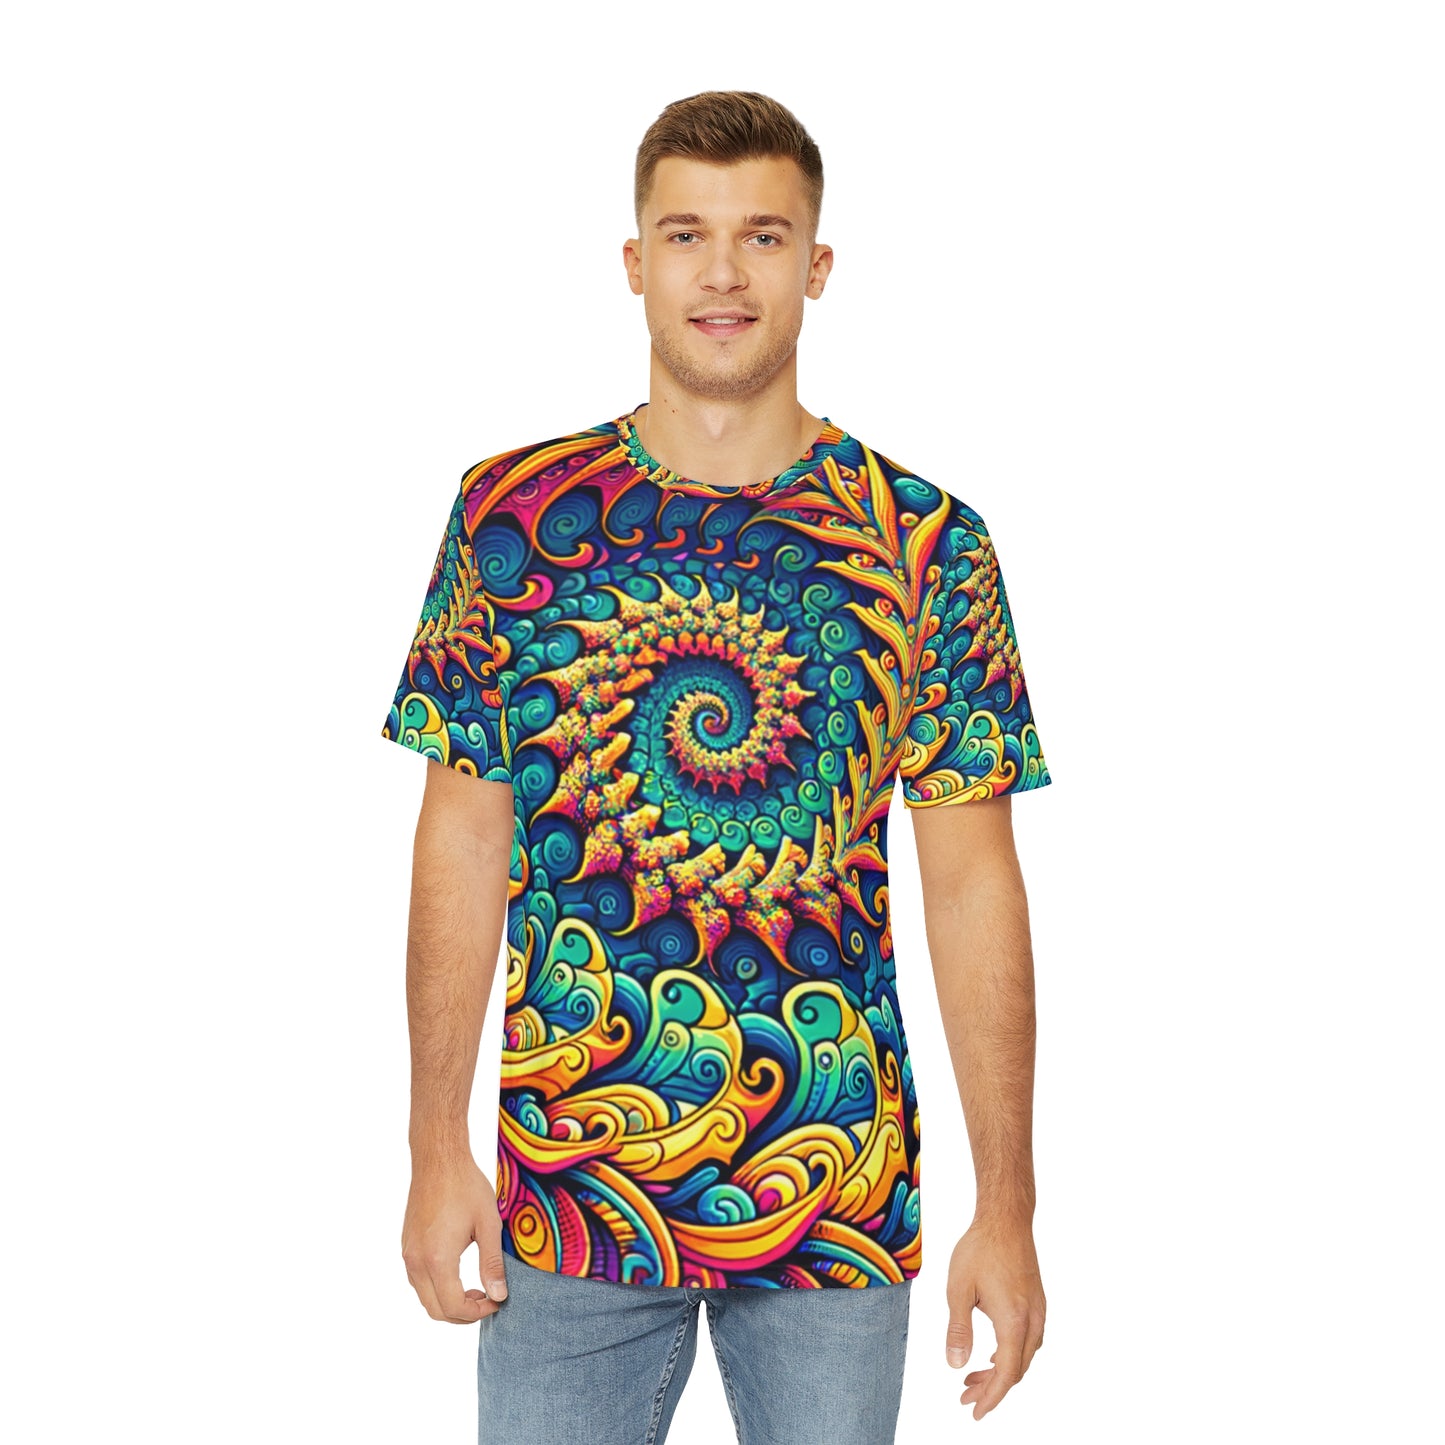 Front view of the Psychedelic Peacock Swirls Crewneck Pullover All-Over Print Short-Sleeved Shirt yellow blue green red peacock swirl pattern  paired with casual denim pants worn by a white man